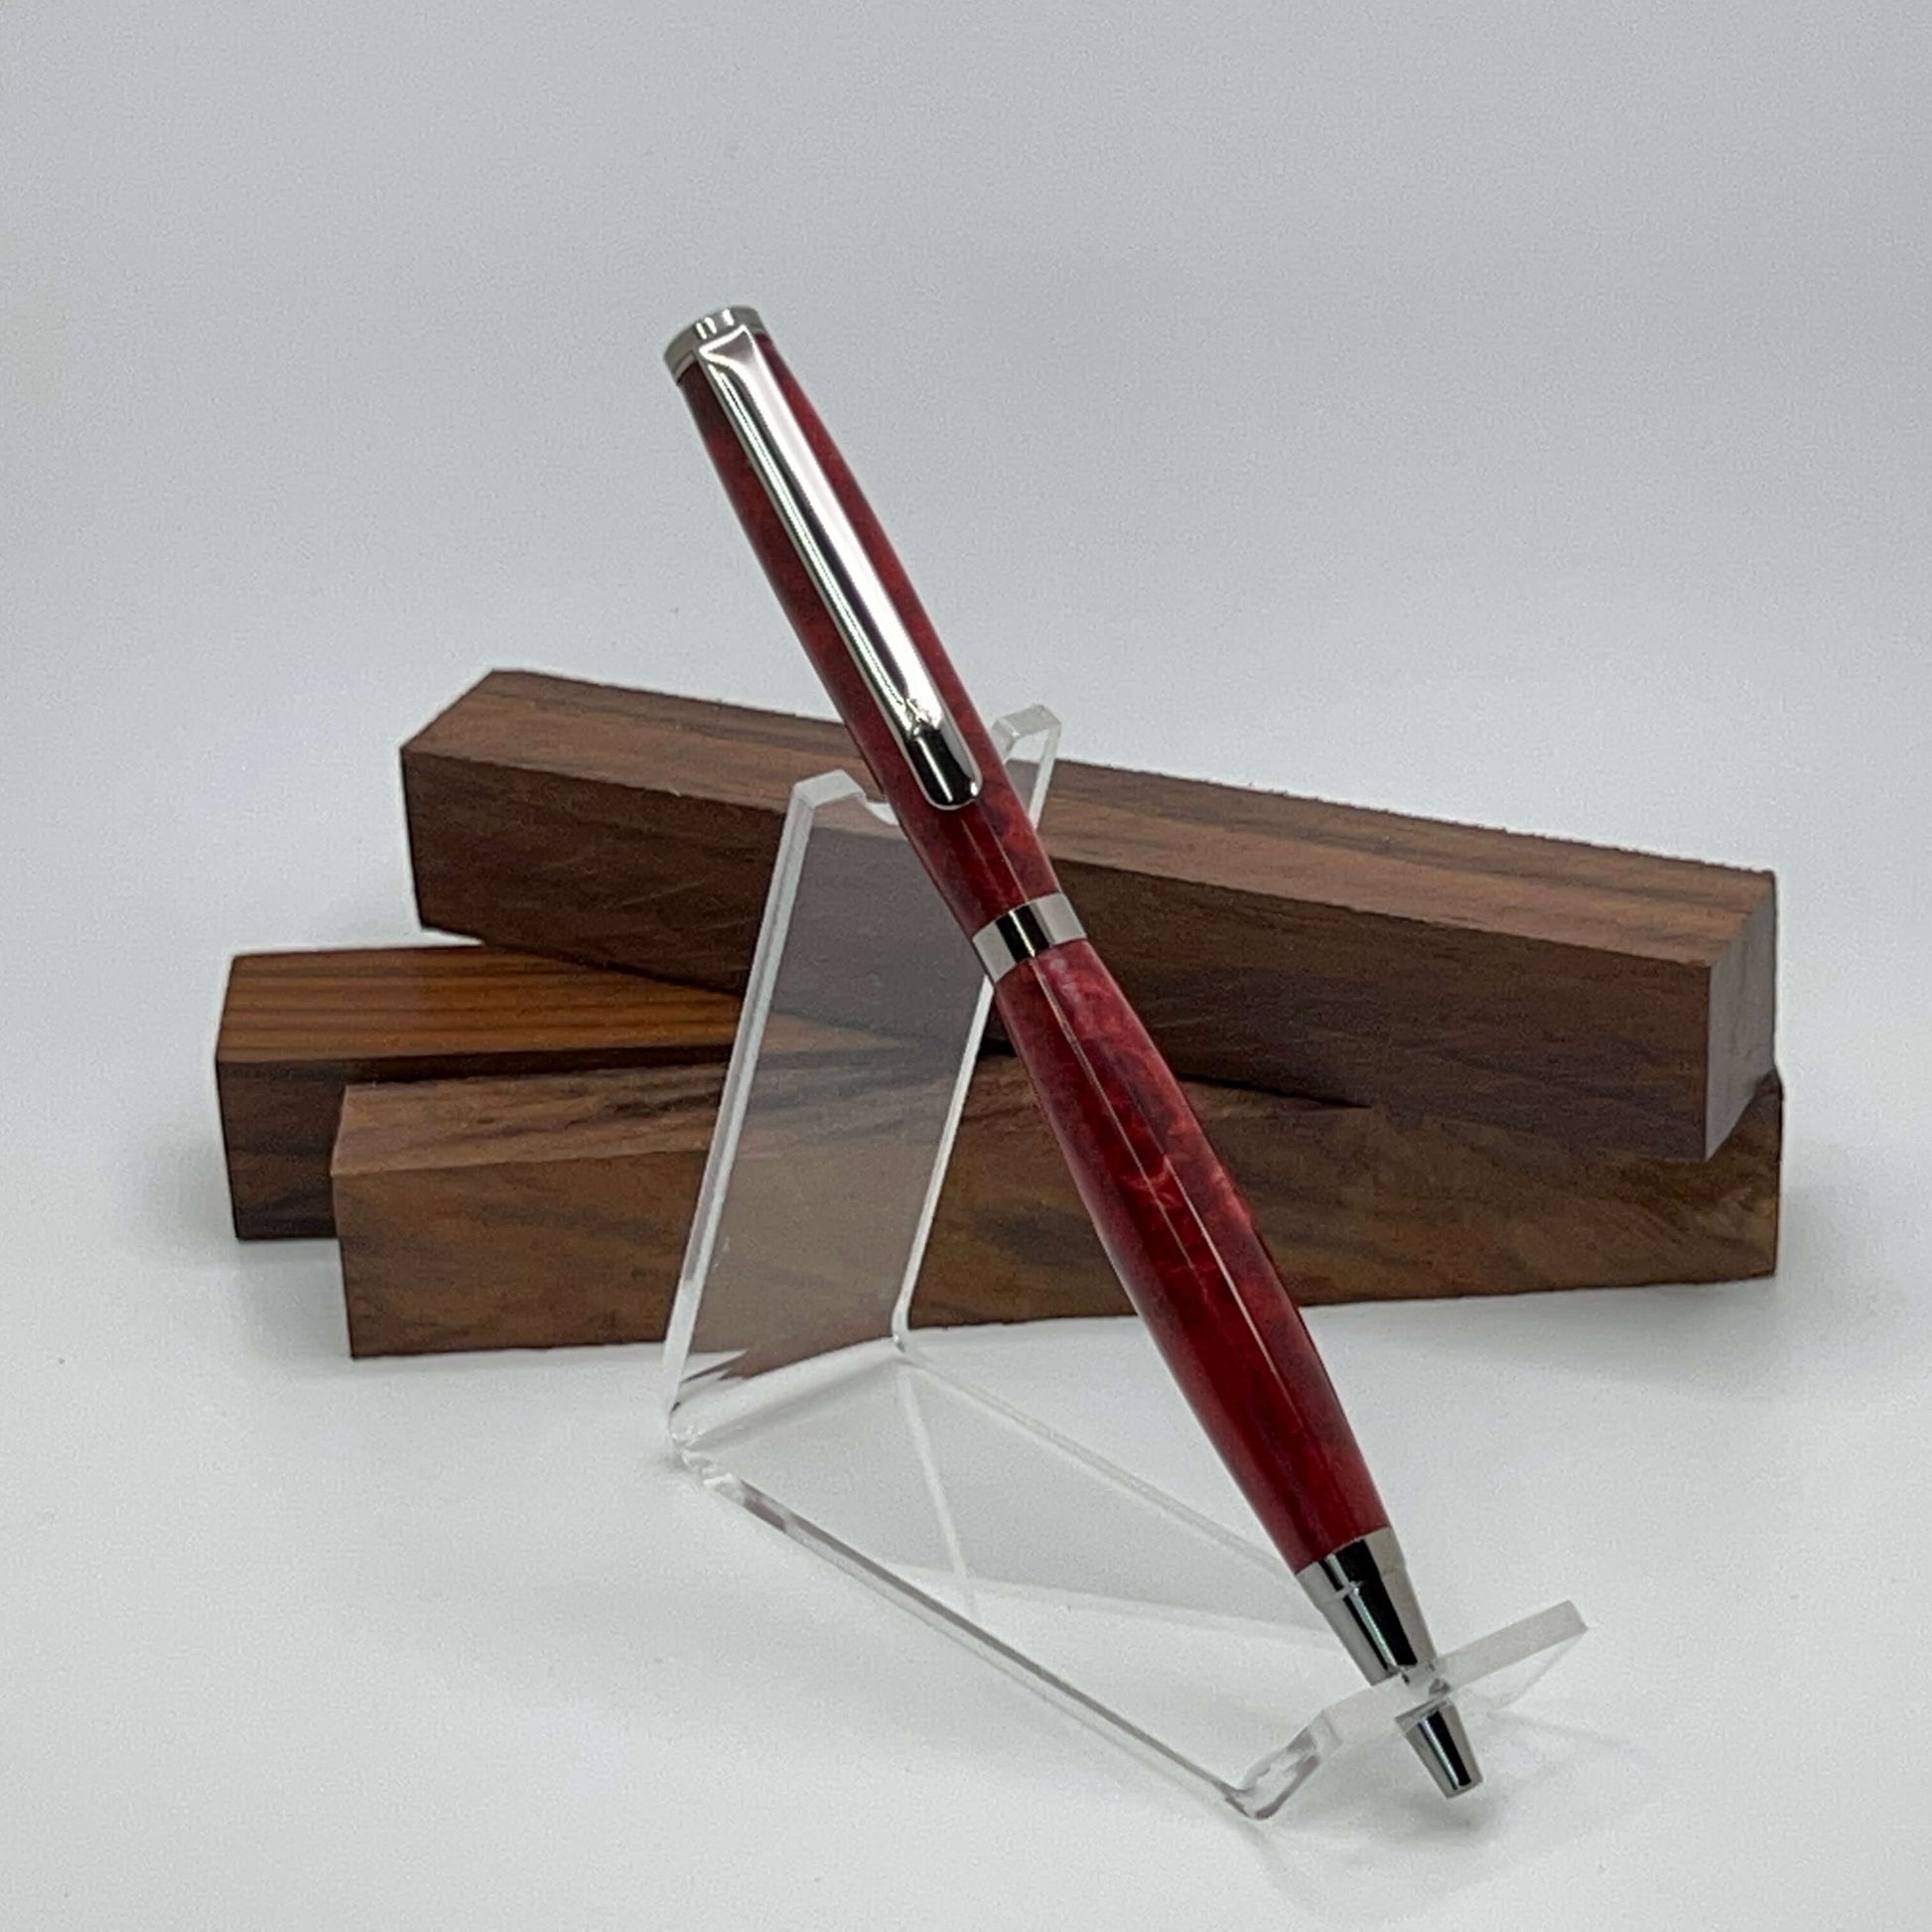 Handcrafted pen with Box Elder Burl wood dyed red and black titanium hardware